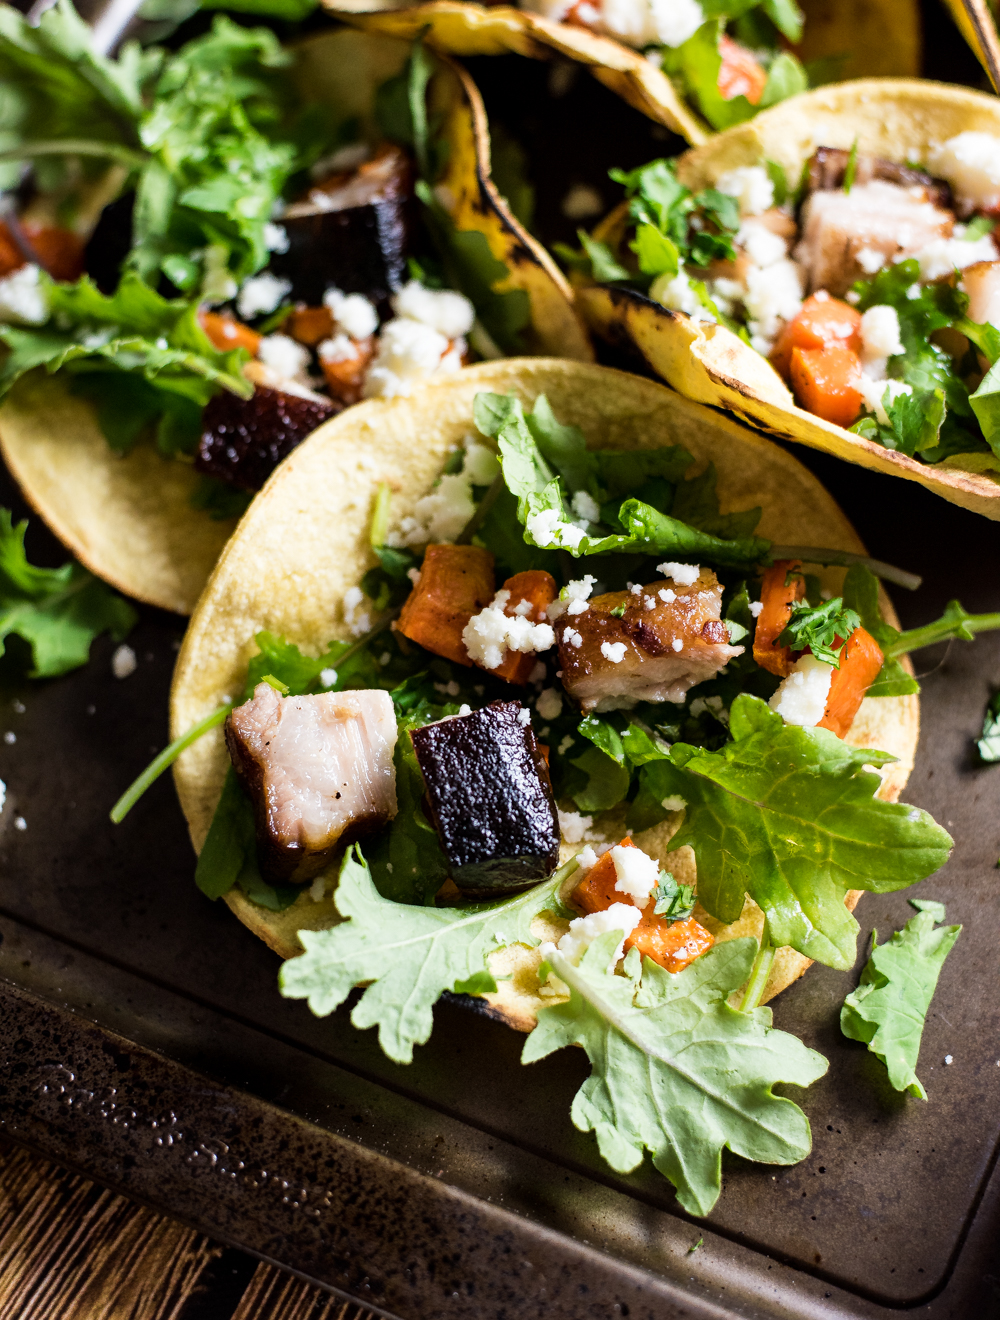 Take your taco Tuesday up a notch, and make these braised pork belly and sweet potato tacos! Crispy, tender pork belly really makes these tacos shine!